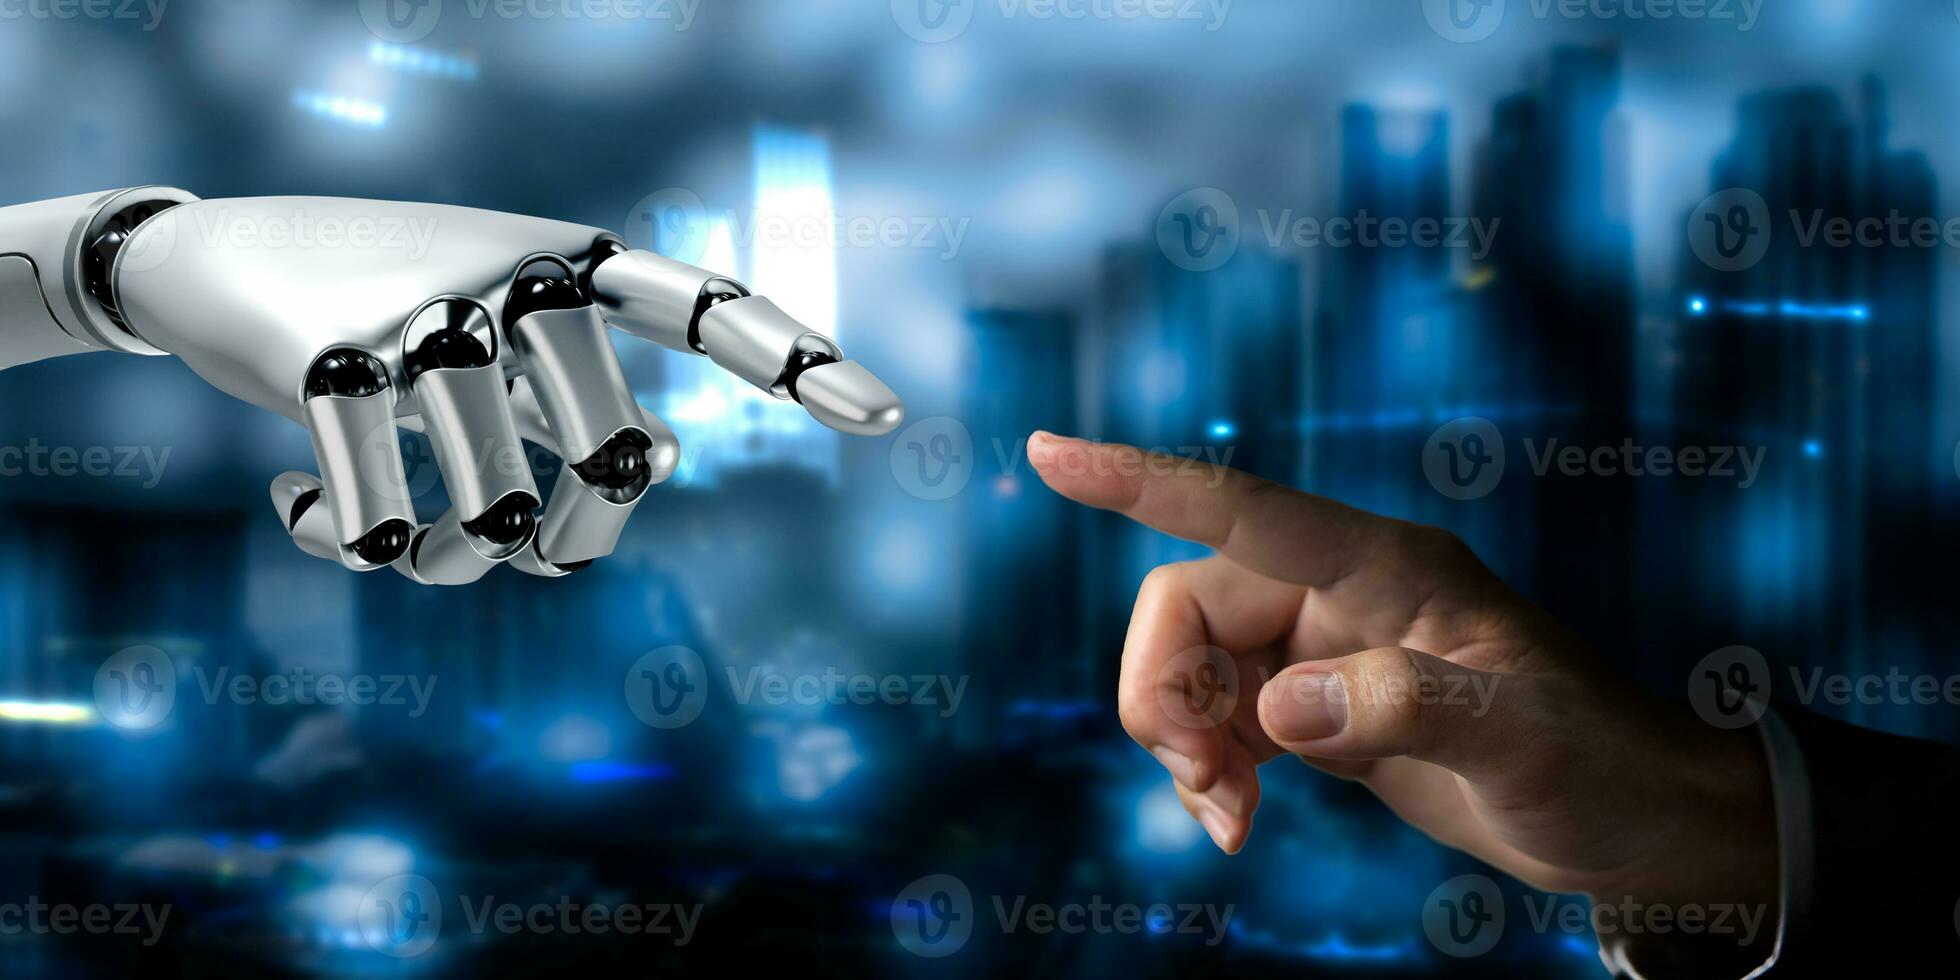 al intelligence AI hand robot white 3d rendering and hand people on background. photo